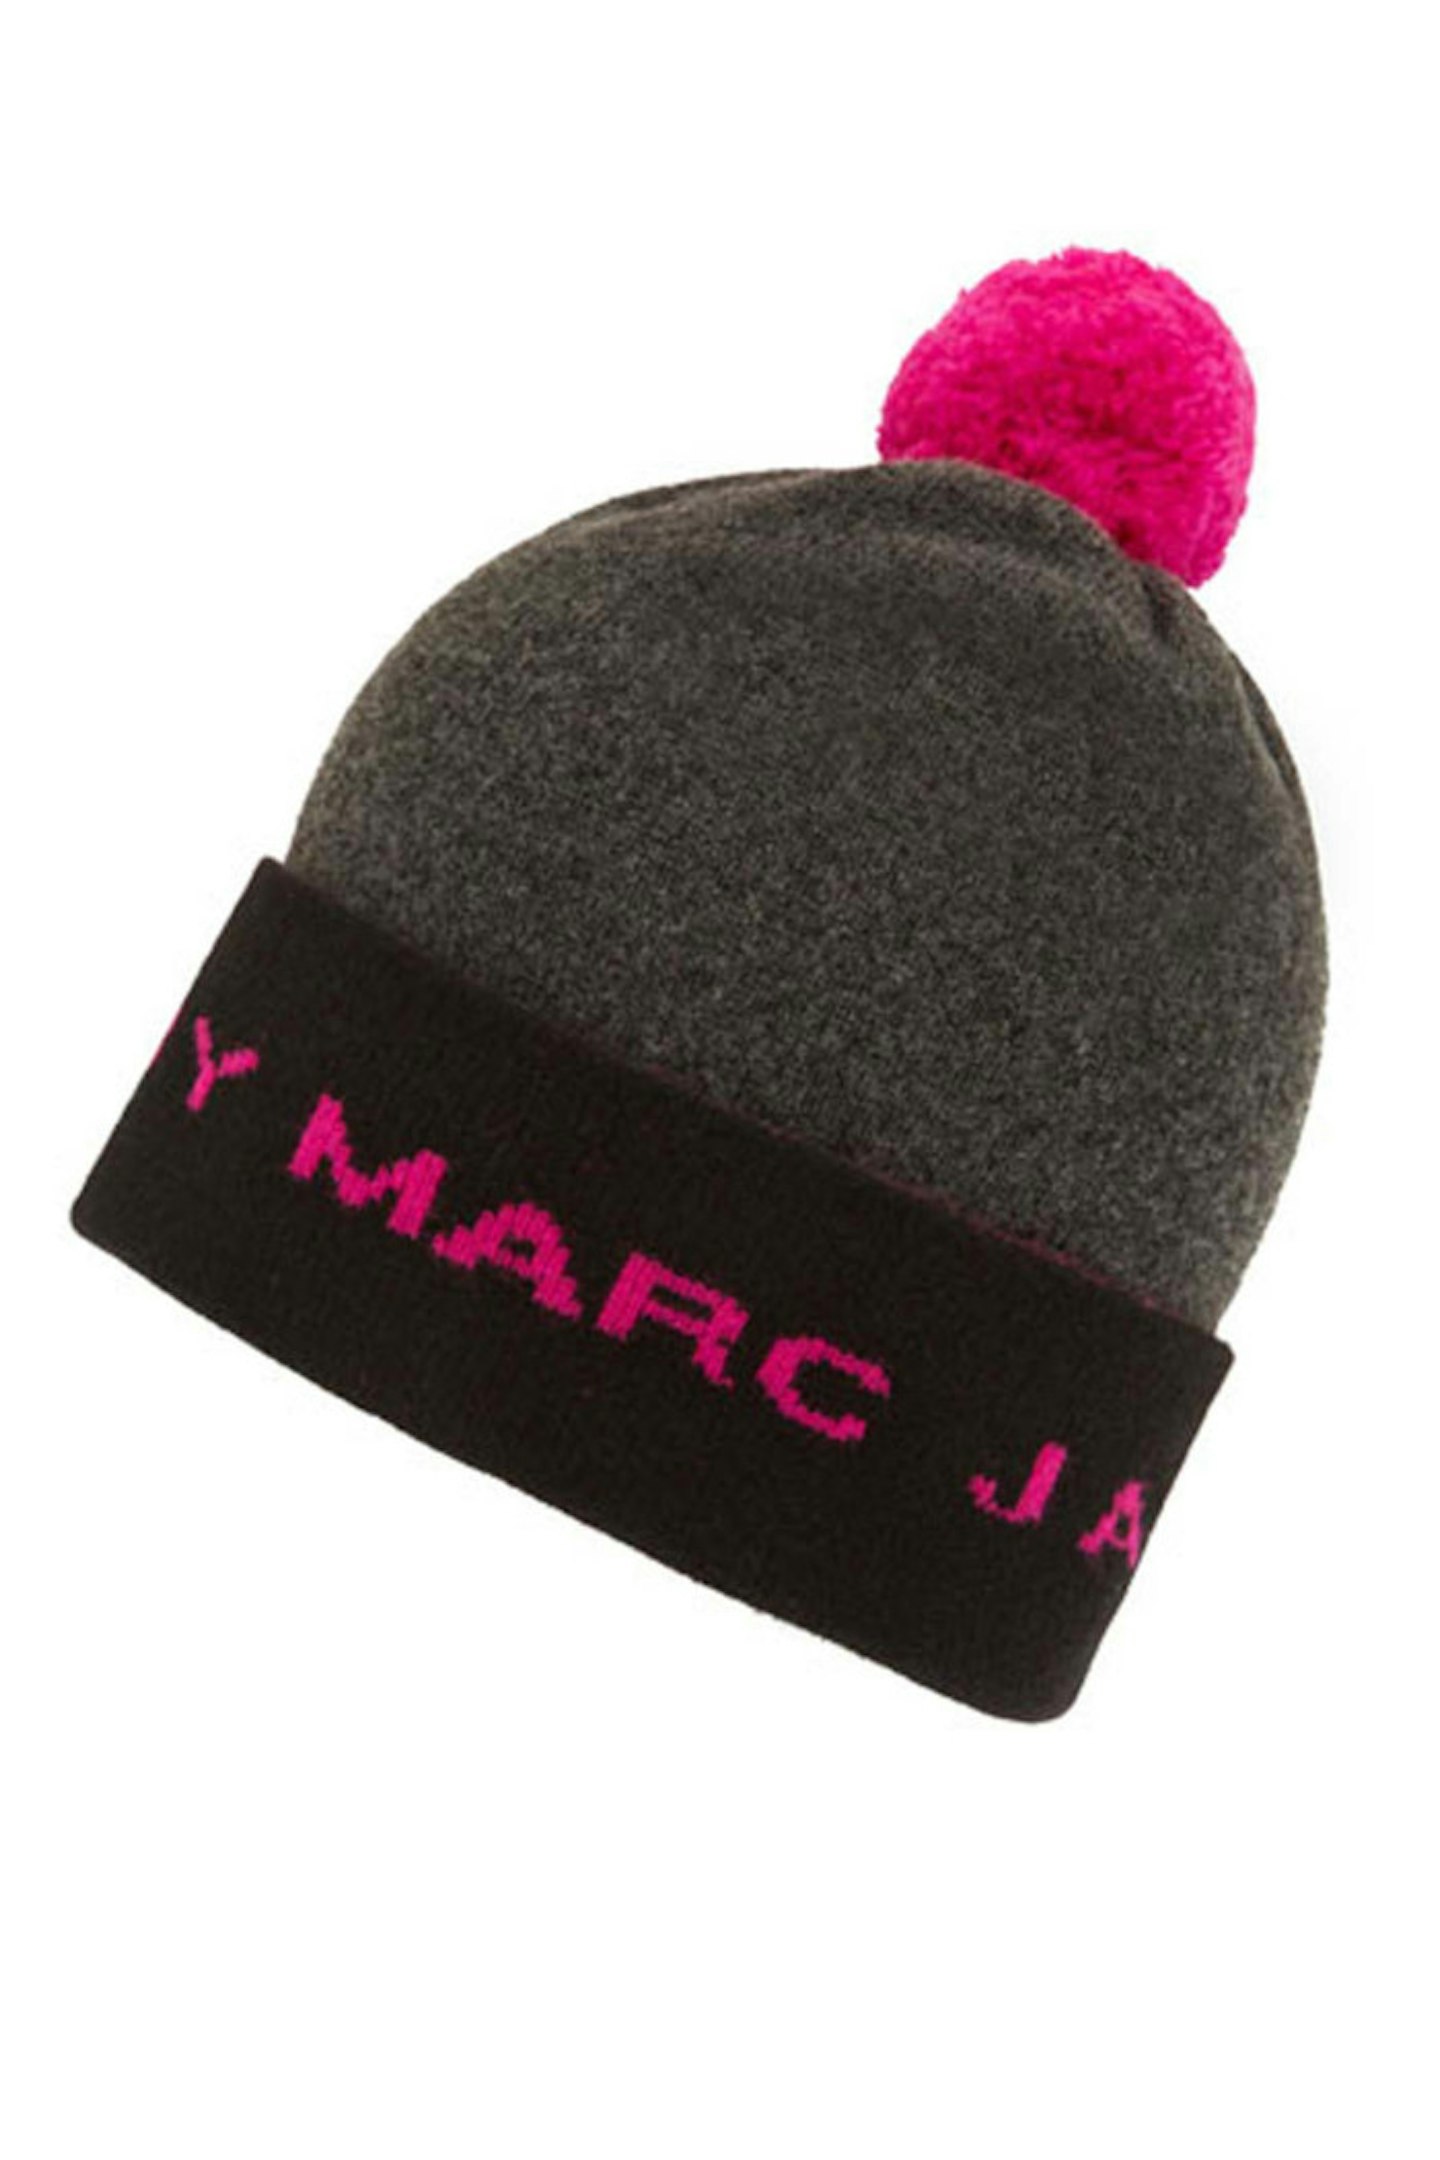 21. Marc by Marc Jacobs